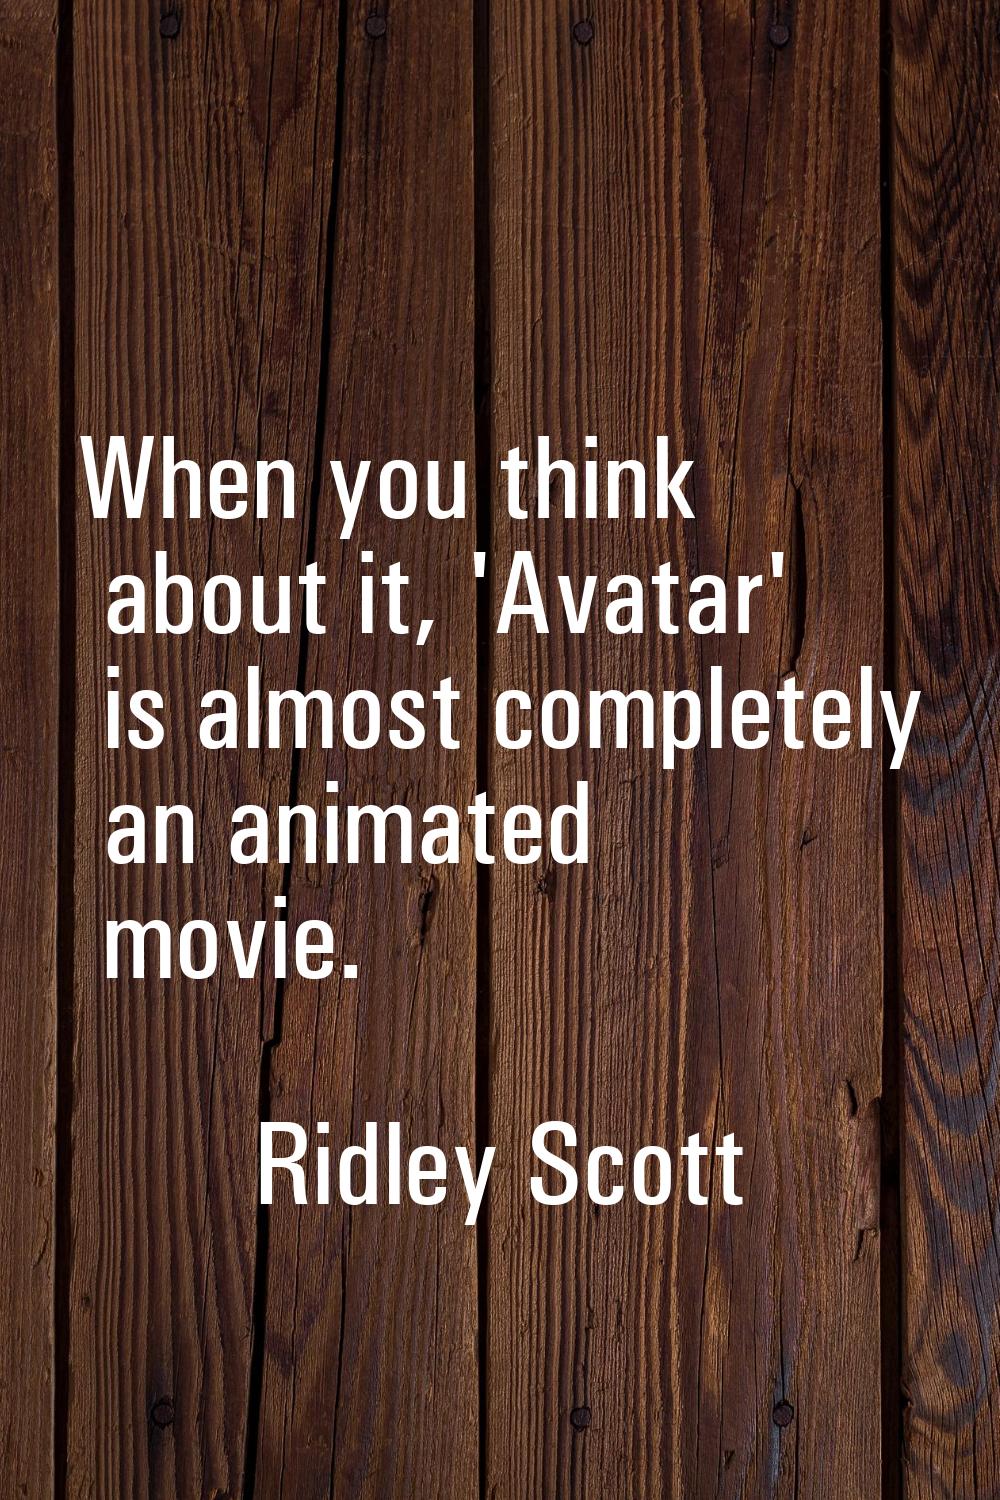 When you think about it, 'Avatar' is almost completely an animated movie.